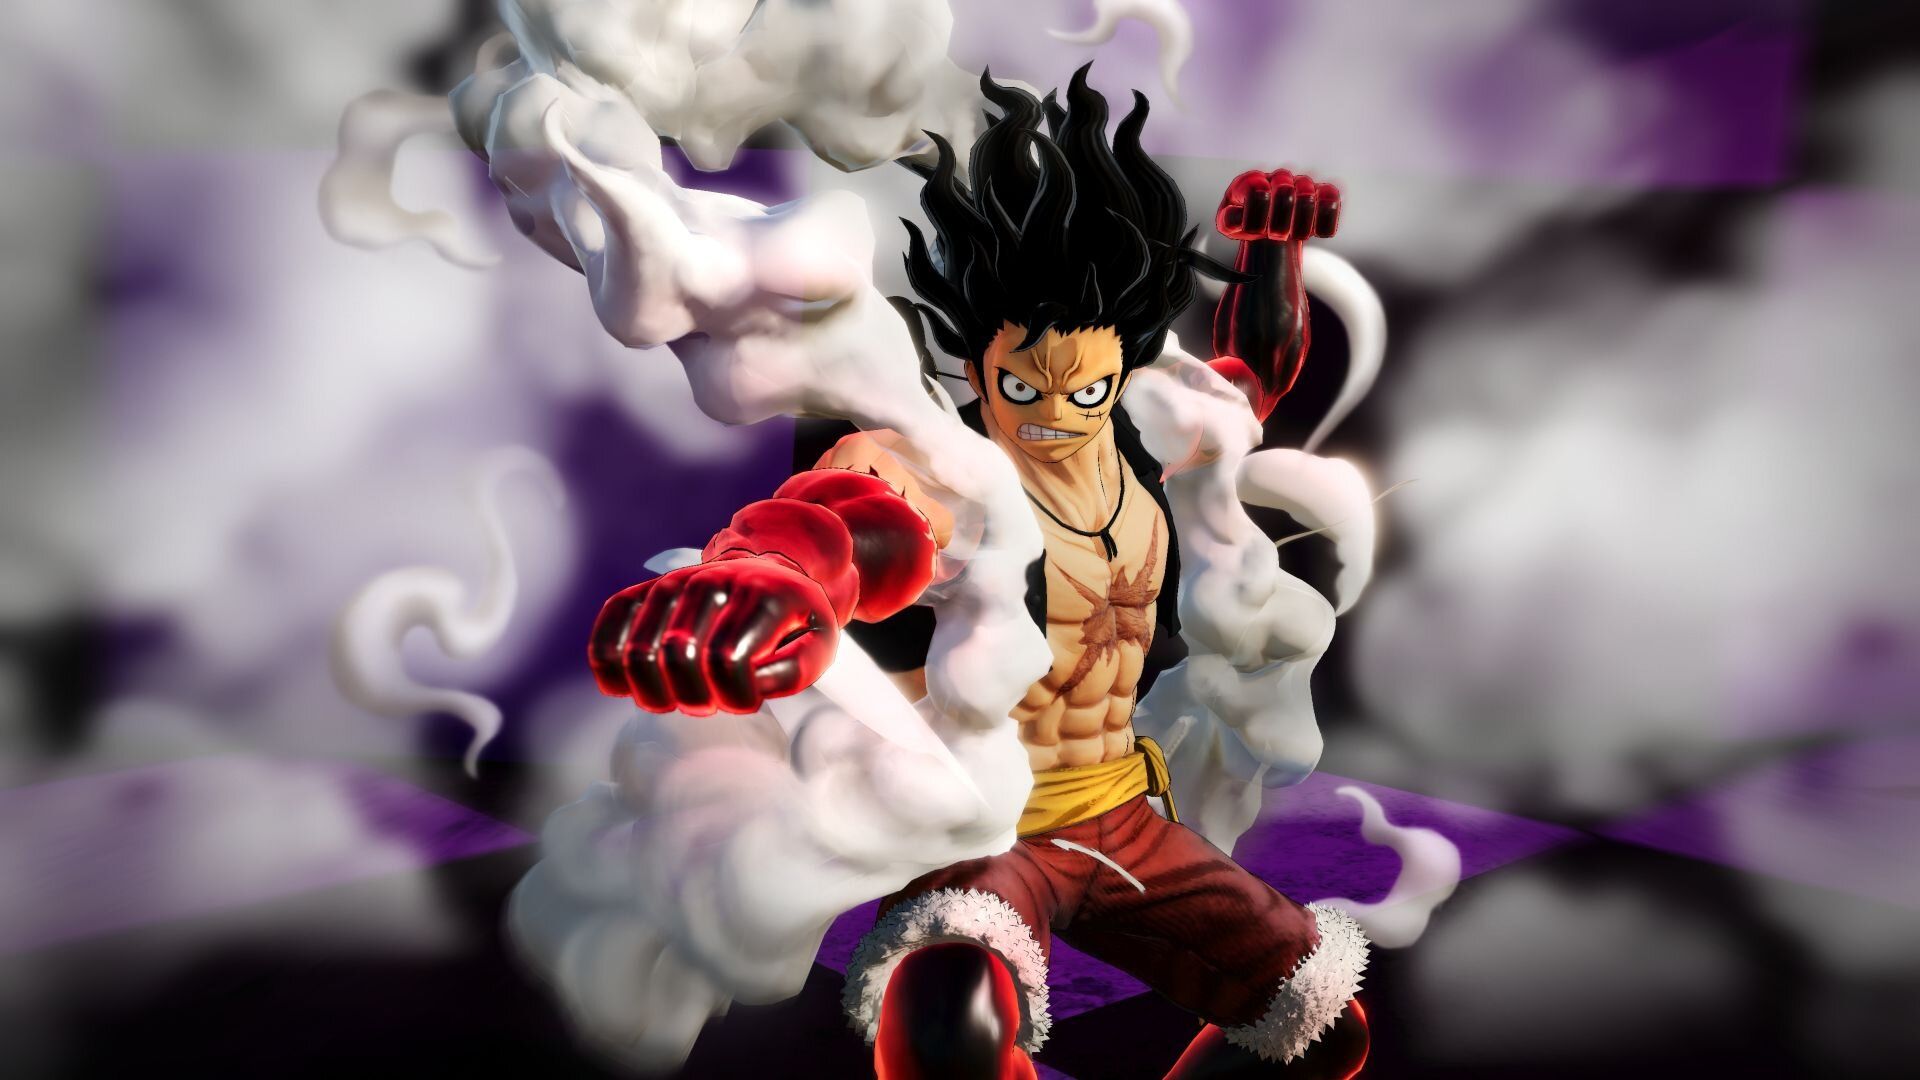 ONE PIECE: PIRATE WARRIORS 4 Will Release March 2020